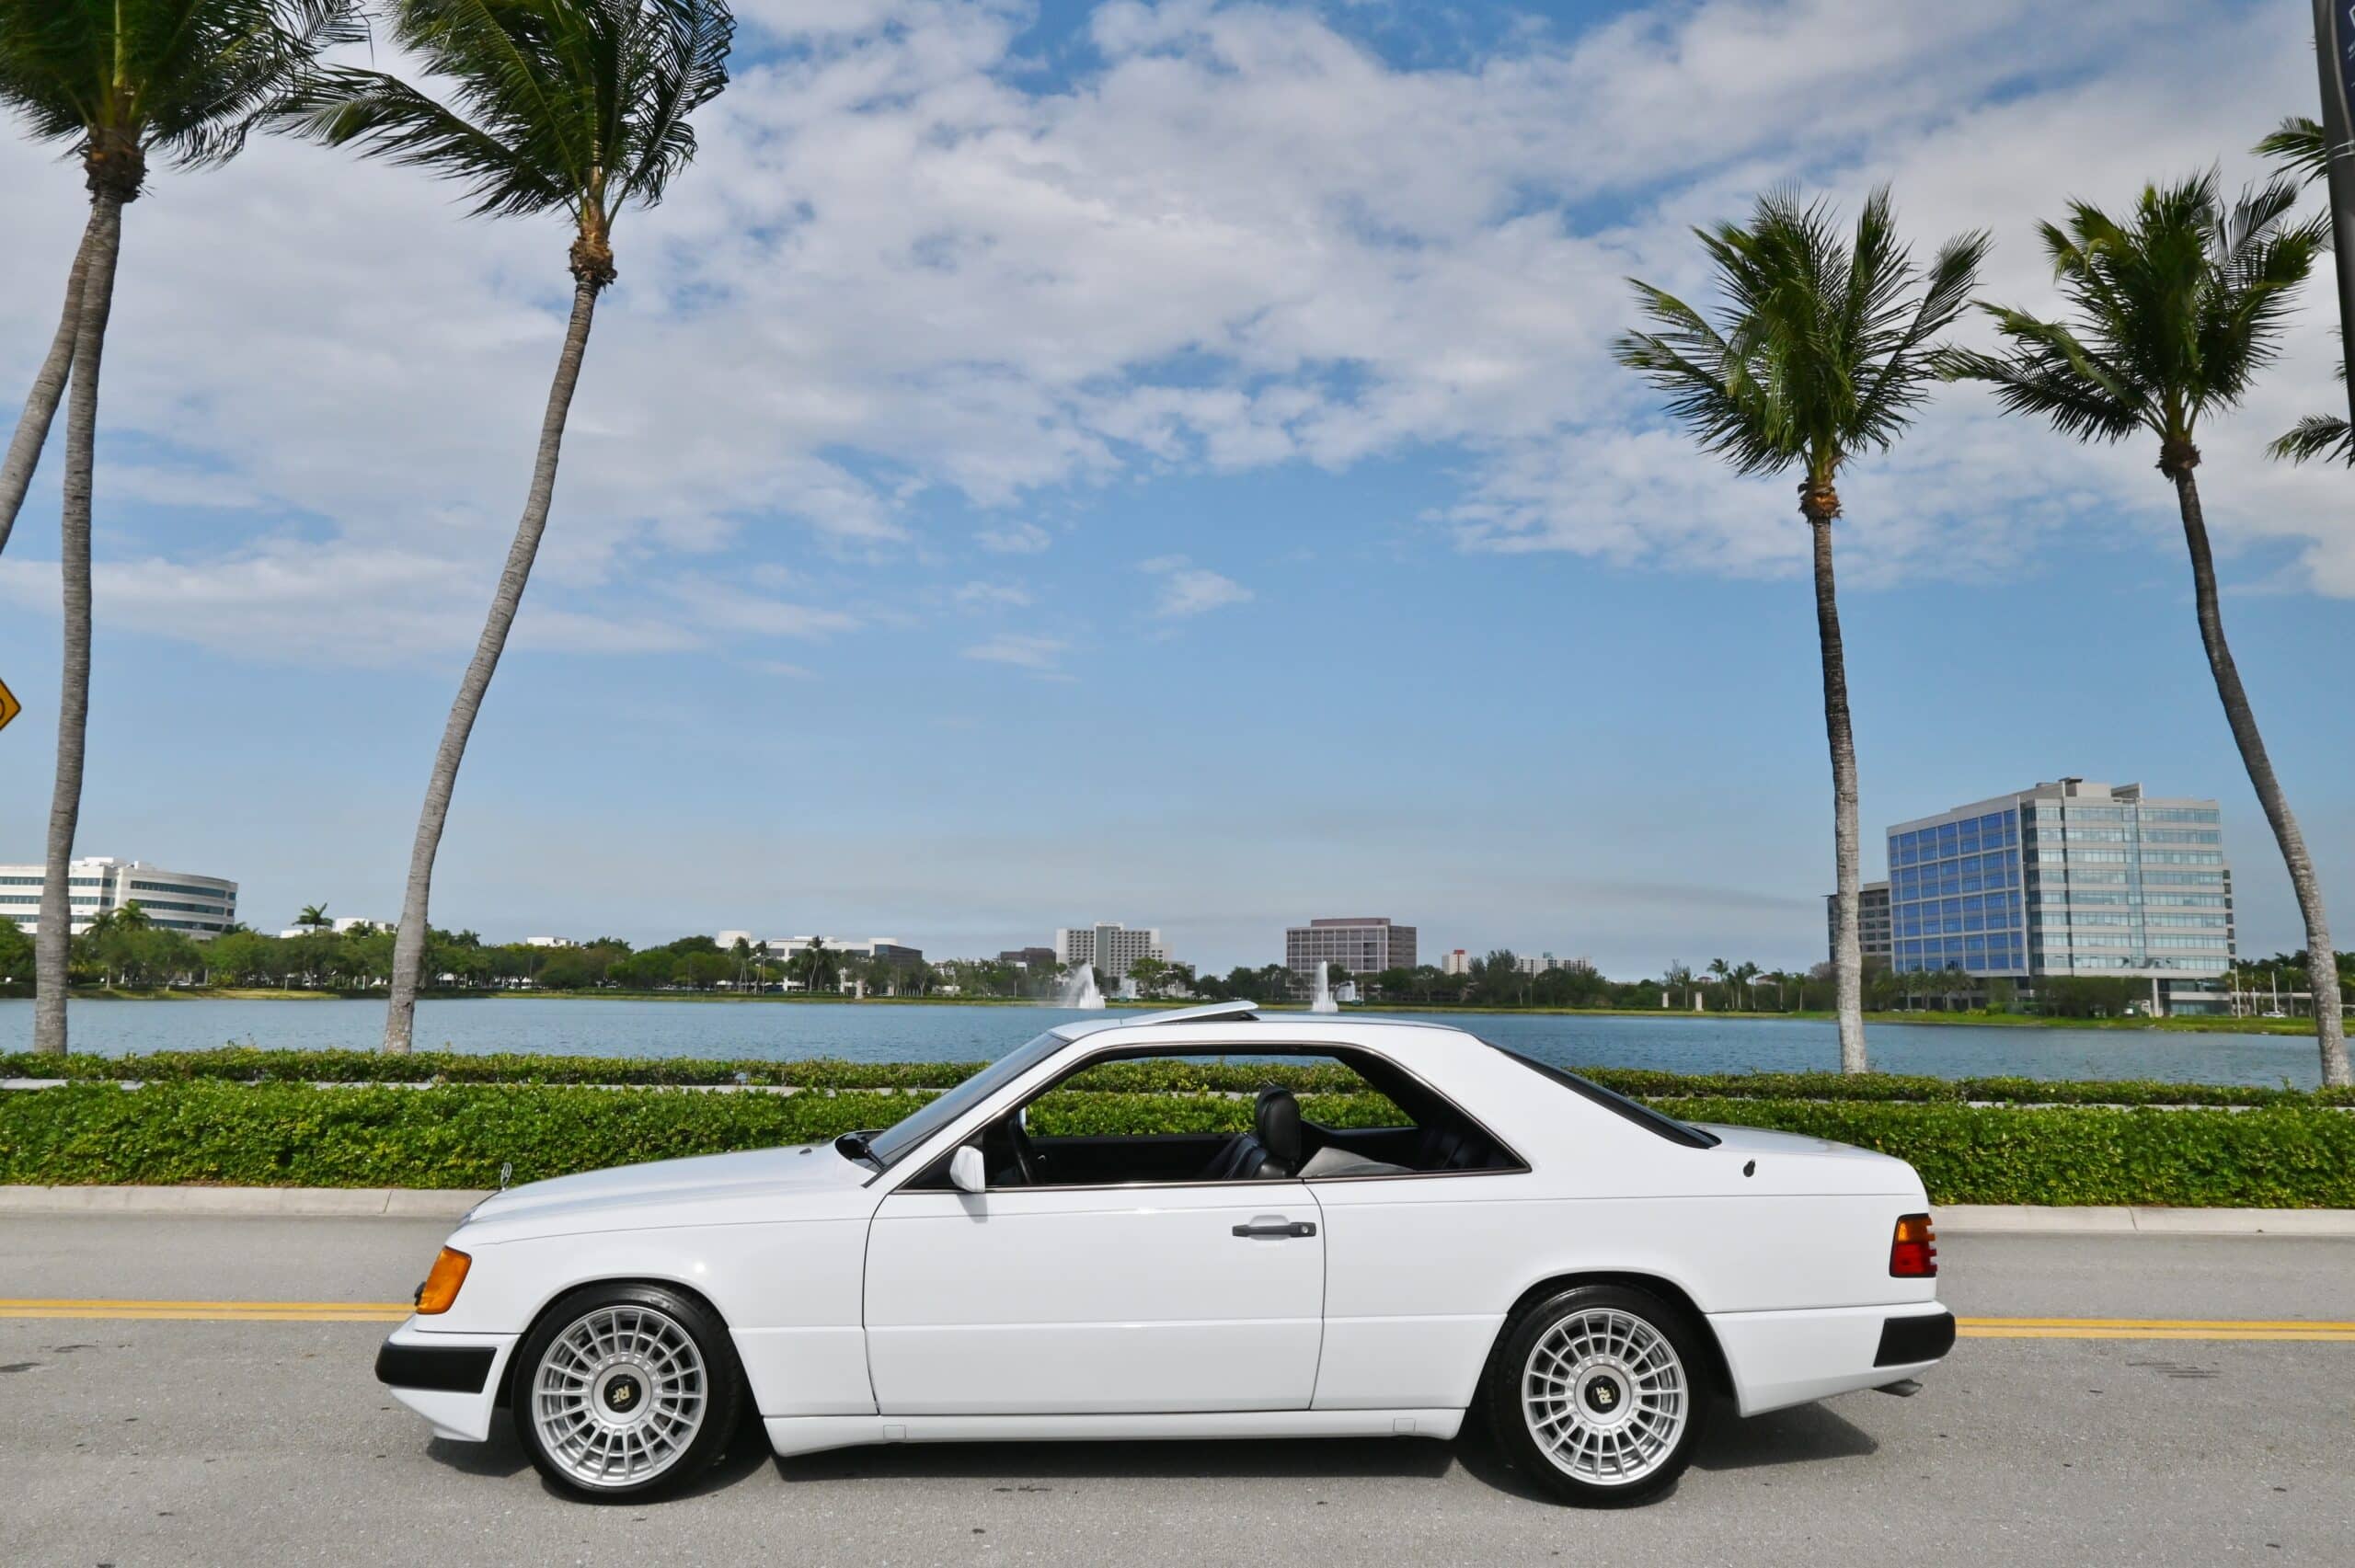 1989 Mercedes-Benz W124 300CE Cleanest 300CE in existence! $40,000 Restoration With Reciepts – Only 63k Miles